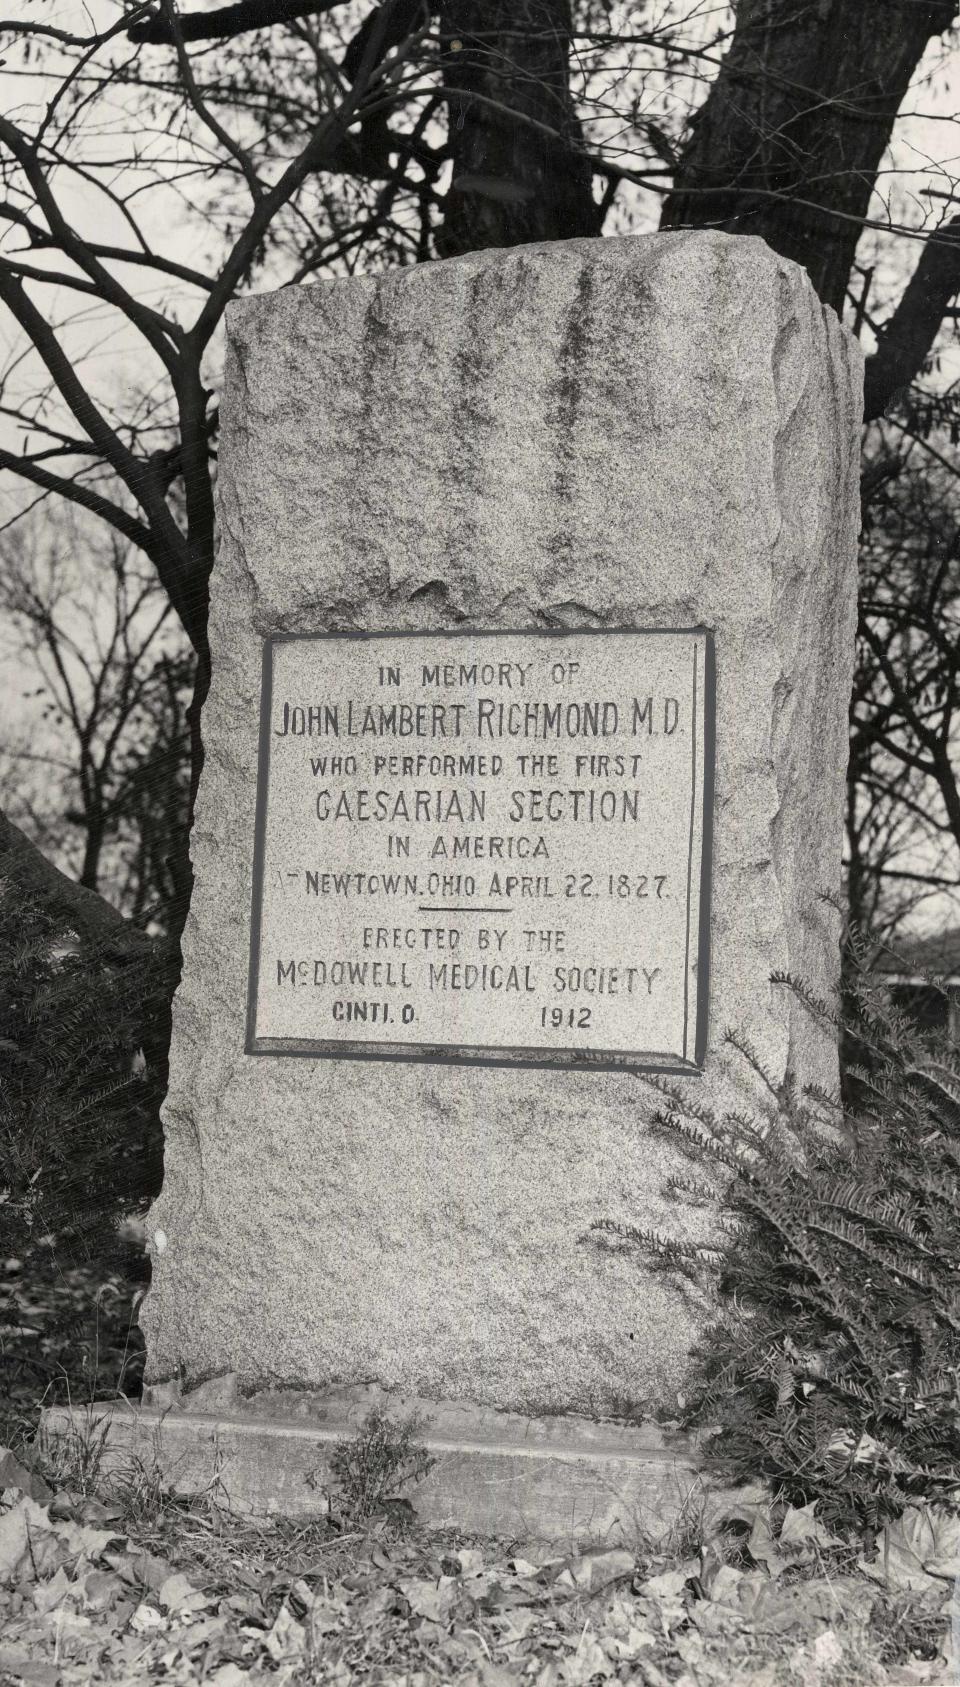 A granite marker in Newtown, Ohio, honors Dr. John Lambert Richmond for performing the first cesarean section in America in 1827.